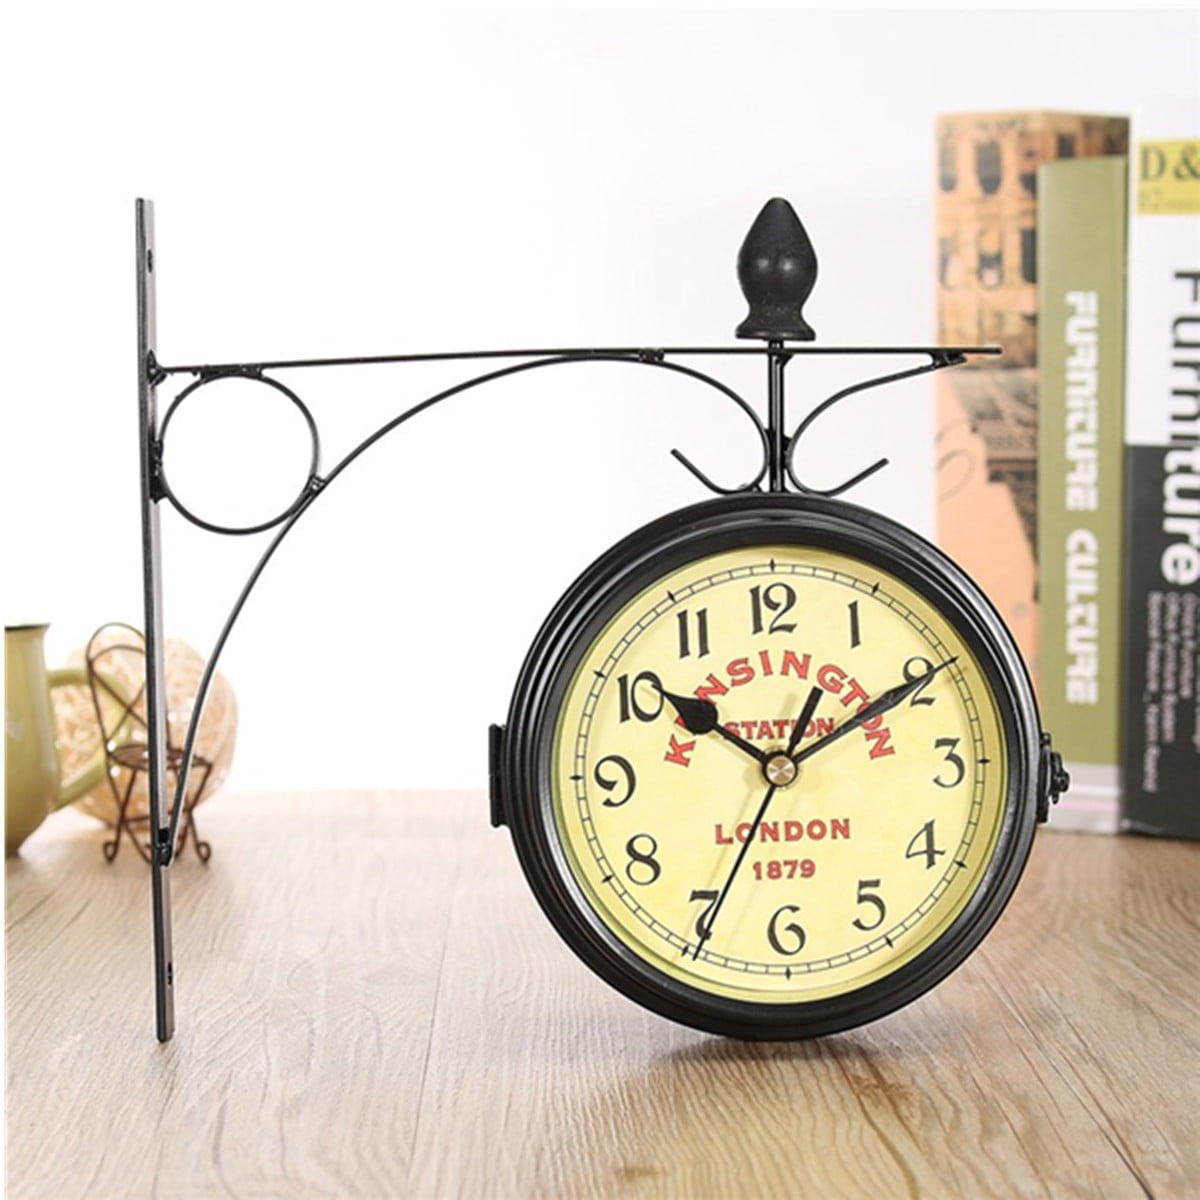 Retro Antique Double Sided Wall Clock Hanging Outdoor Station Quartz Battery USA 